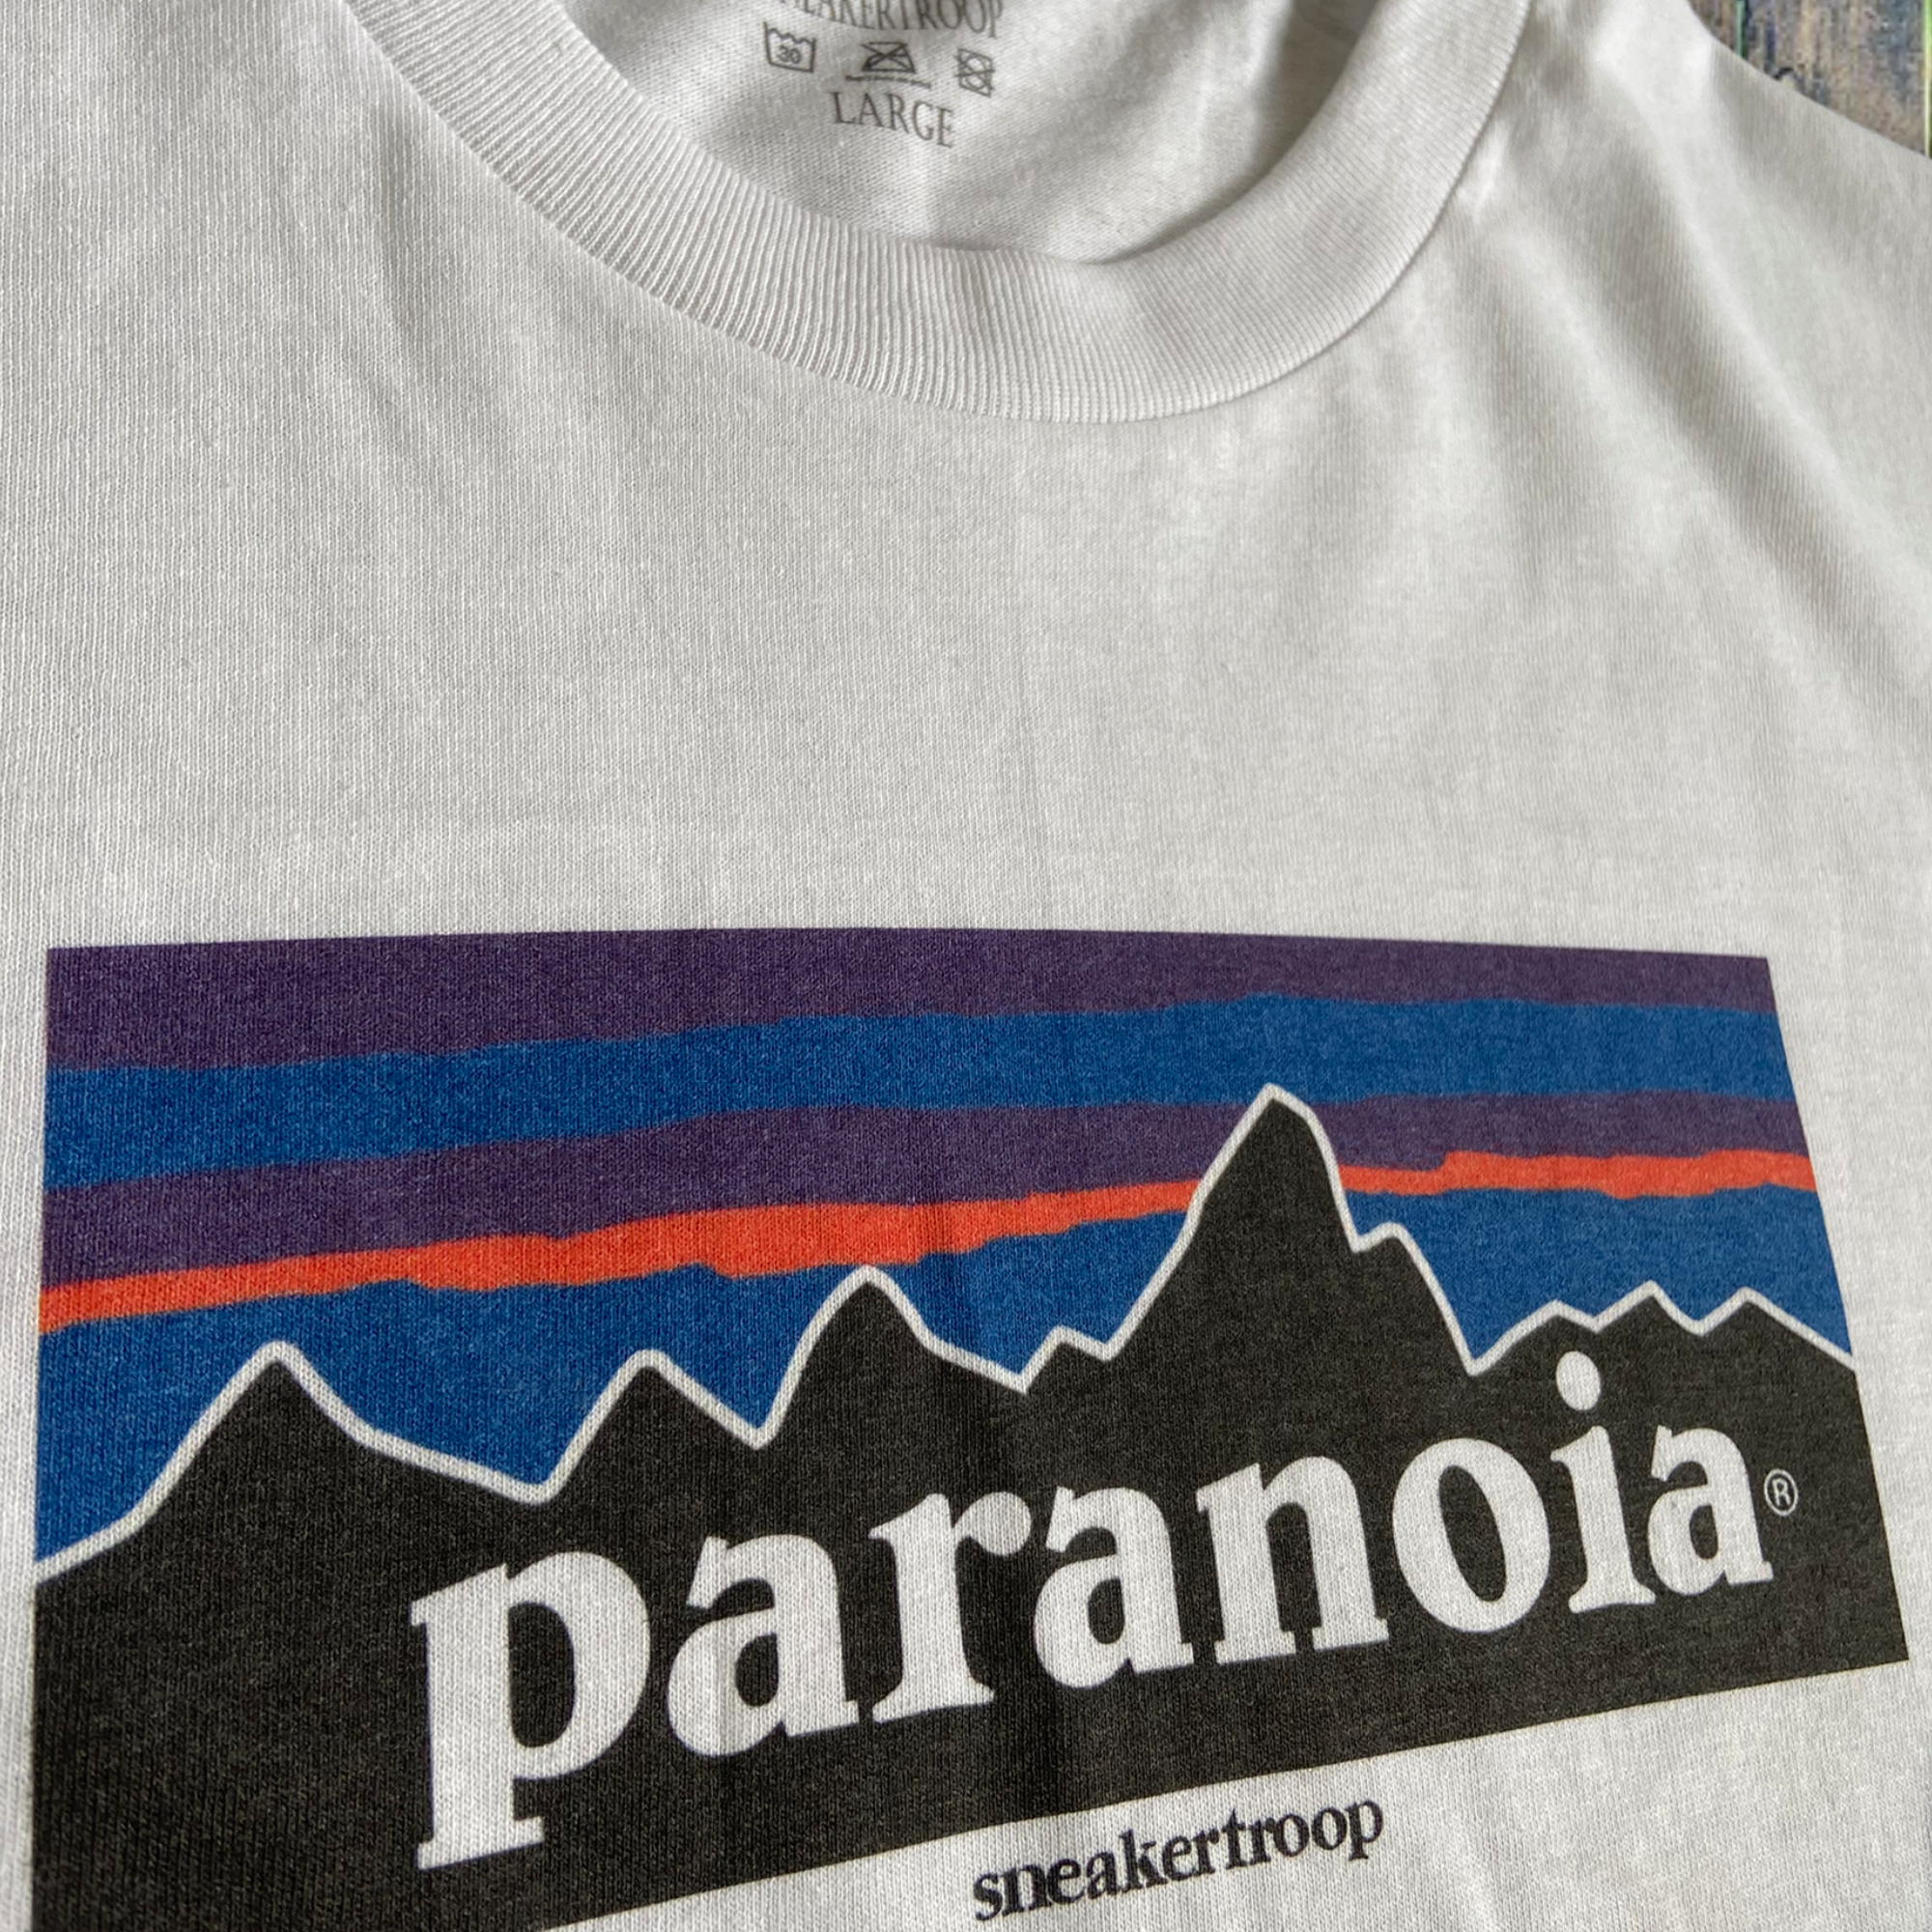 Paranoia t-shirt  by sneakertroop